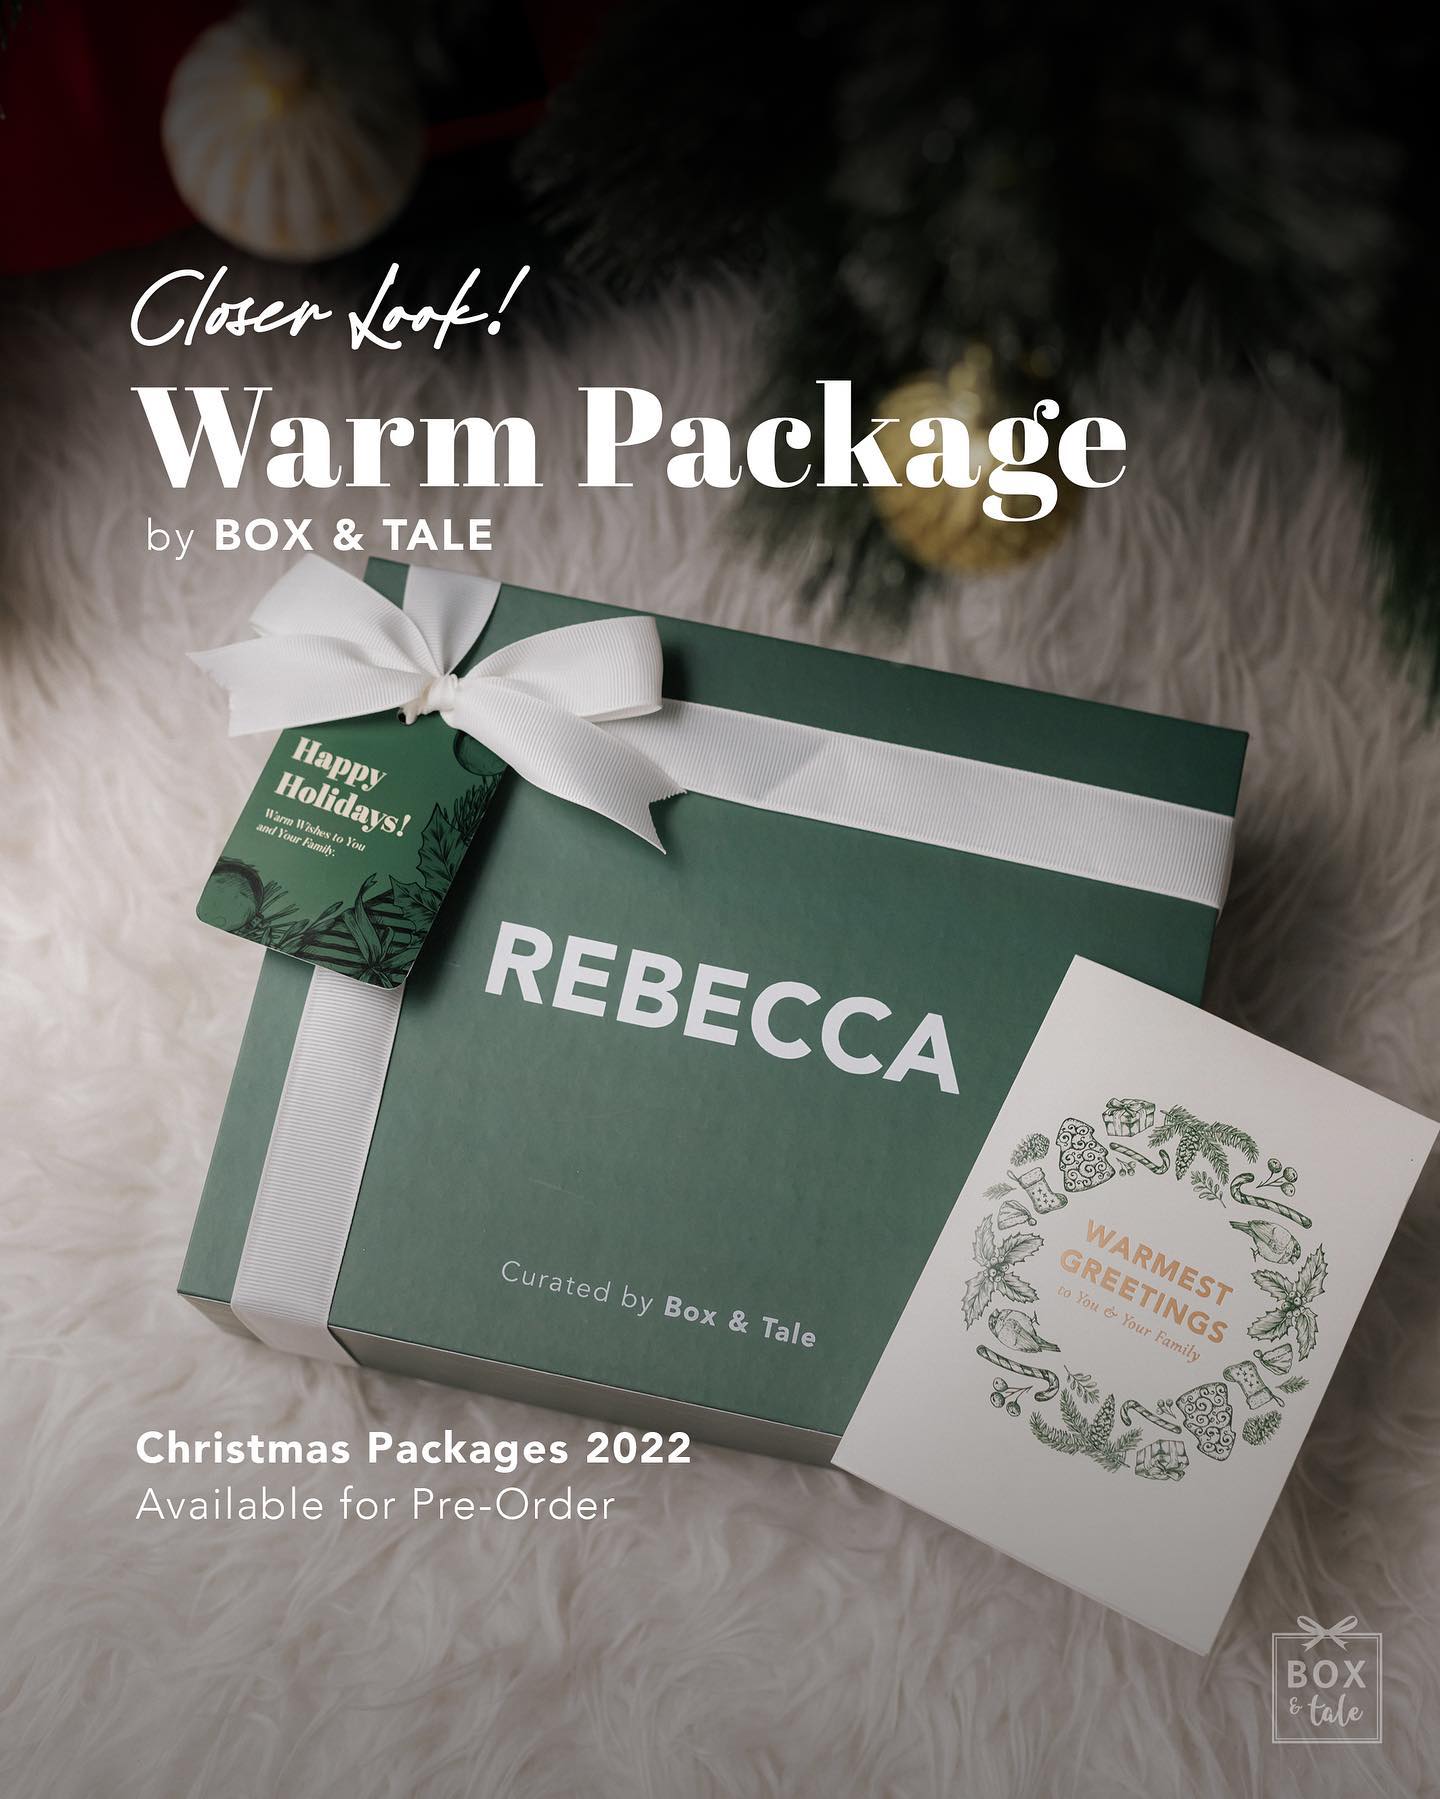 Save this Christmas Gift Idea! ✨

Back sending warmest wishes to everyone this holiday season. Made them feel loved, cozy, and warm, everywhere they are!
 
WHAT’S INSIDE Box & Tale’s Personalized Box,
Large Chocolate Chip Cookies,
Christmas Mug,
Peppermint Tea,
Gold Tea Infuser,
Greeting Card with Custom Photo
 
Includes: Gift Packaging, Hand Wrapping, & Custom Card.
Box Size: 21x25x10 cm
____

PRE-ORDER AVAILABLE until 2 December 2022
Shipping 10 December 2022

Contact us through Whatsapp or DM, also feel free to reach out to us for Corporate Gifting!

Limited Slot Available, Don’t Miss It!

——

BOX & TALE
(Custom Gift, Hampers, & Corporate)
Personalized Your Own Gift at www.boxandtale.com

Contact us at 0813 1103 3691

——

#boxandtale #giftboxjakarta #giftboxcustom #hampersmakanan #hamperschristmas #hampersnataljakarta #hampernatal #parcelunik #parcelnataljakarta #kotakkado #hampersbox #hamperskuekring
#hampersnatal #parcelnatal #parcelmakanan #hampersindonesia #hampersjkt #gifthampers #idekado #kadonatal #hampersjakarta